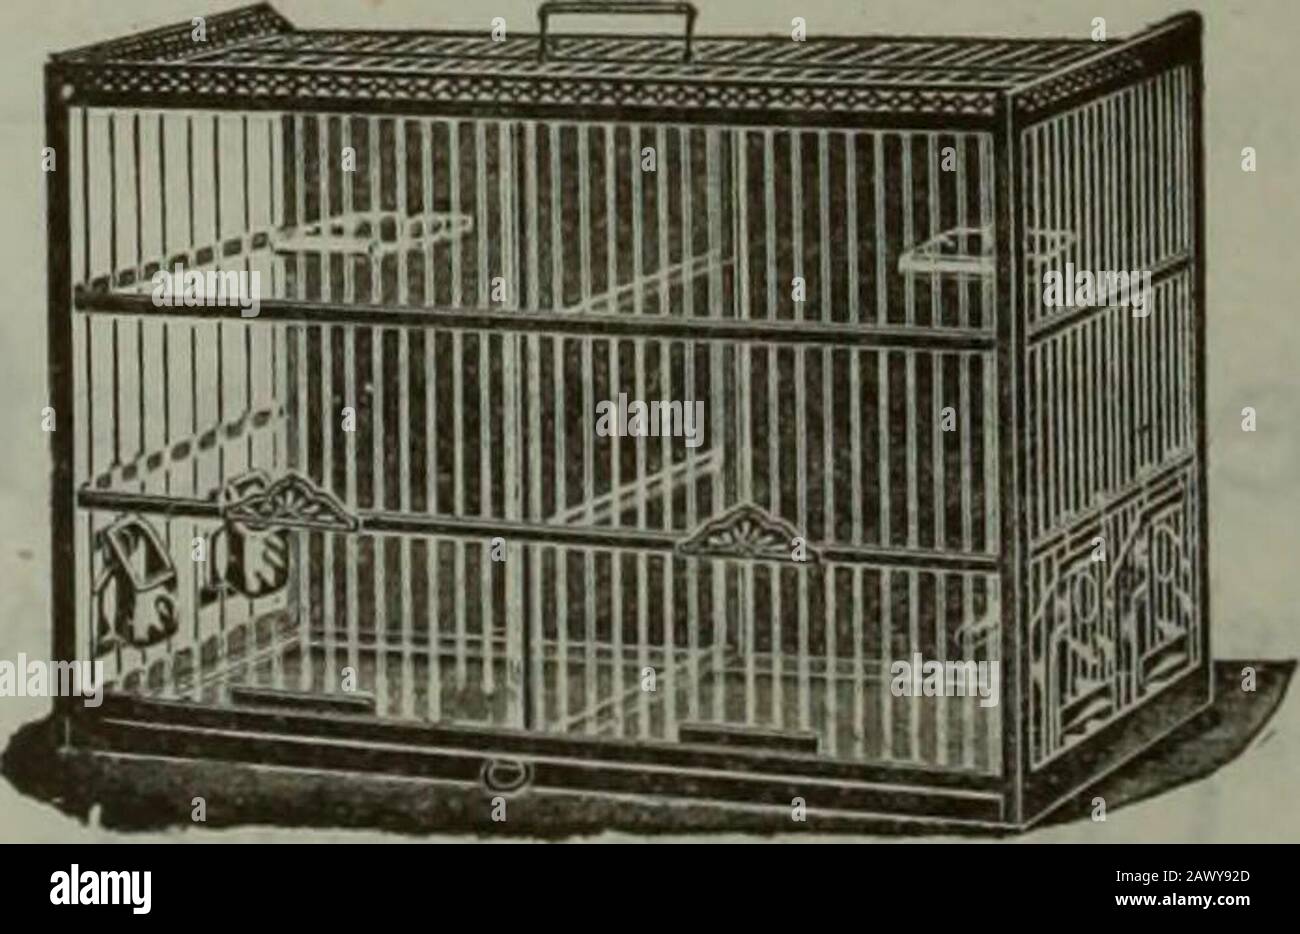 Hardware merchandising January-March 1919 . are absolutely necessary forthe scientific and hygienic rais-ing of canary birds. All metal—White Enameled—Green trimmed—Closed back—Two partitions—Two nestsand nest holders—Four cups—Six perches—Sliding drawer. THE ANDREW B. HENDRYX COMPANY BREEDING CAGES No. 86S—17^ x 83/4 x 1314.No. 86—20 x 10 x 14.No. 87—22 x 11 x 1534,.No. 88—2414 x I21/4 x 1614.No. 113—263,4 x 10 x 137/8. The breeding time extends fromJanuary through April, and the in-creased interest in raising birds re-quires a stock of these cages. NEW HAVEN, CONN.. January 4, 1919. II A 1! Stock Photo